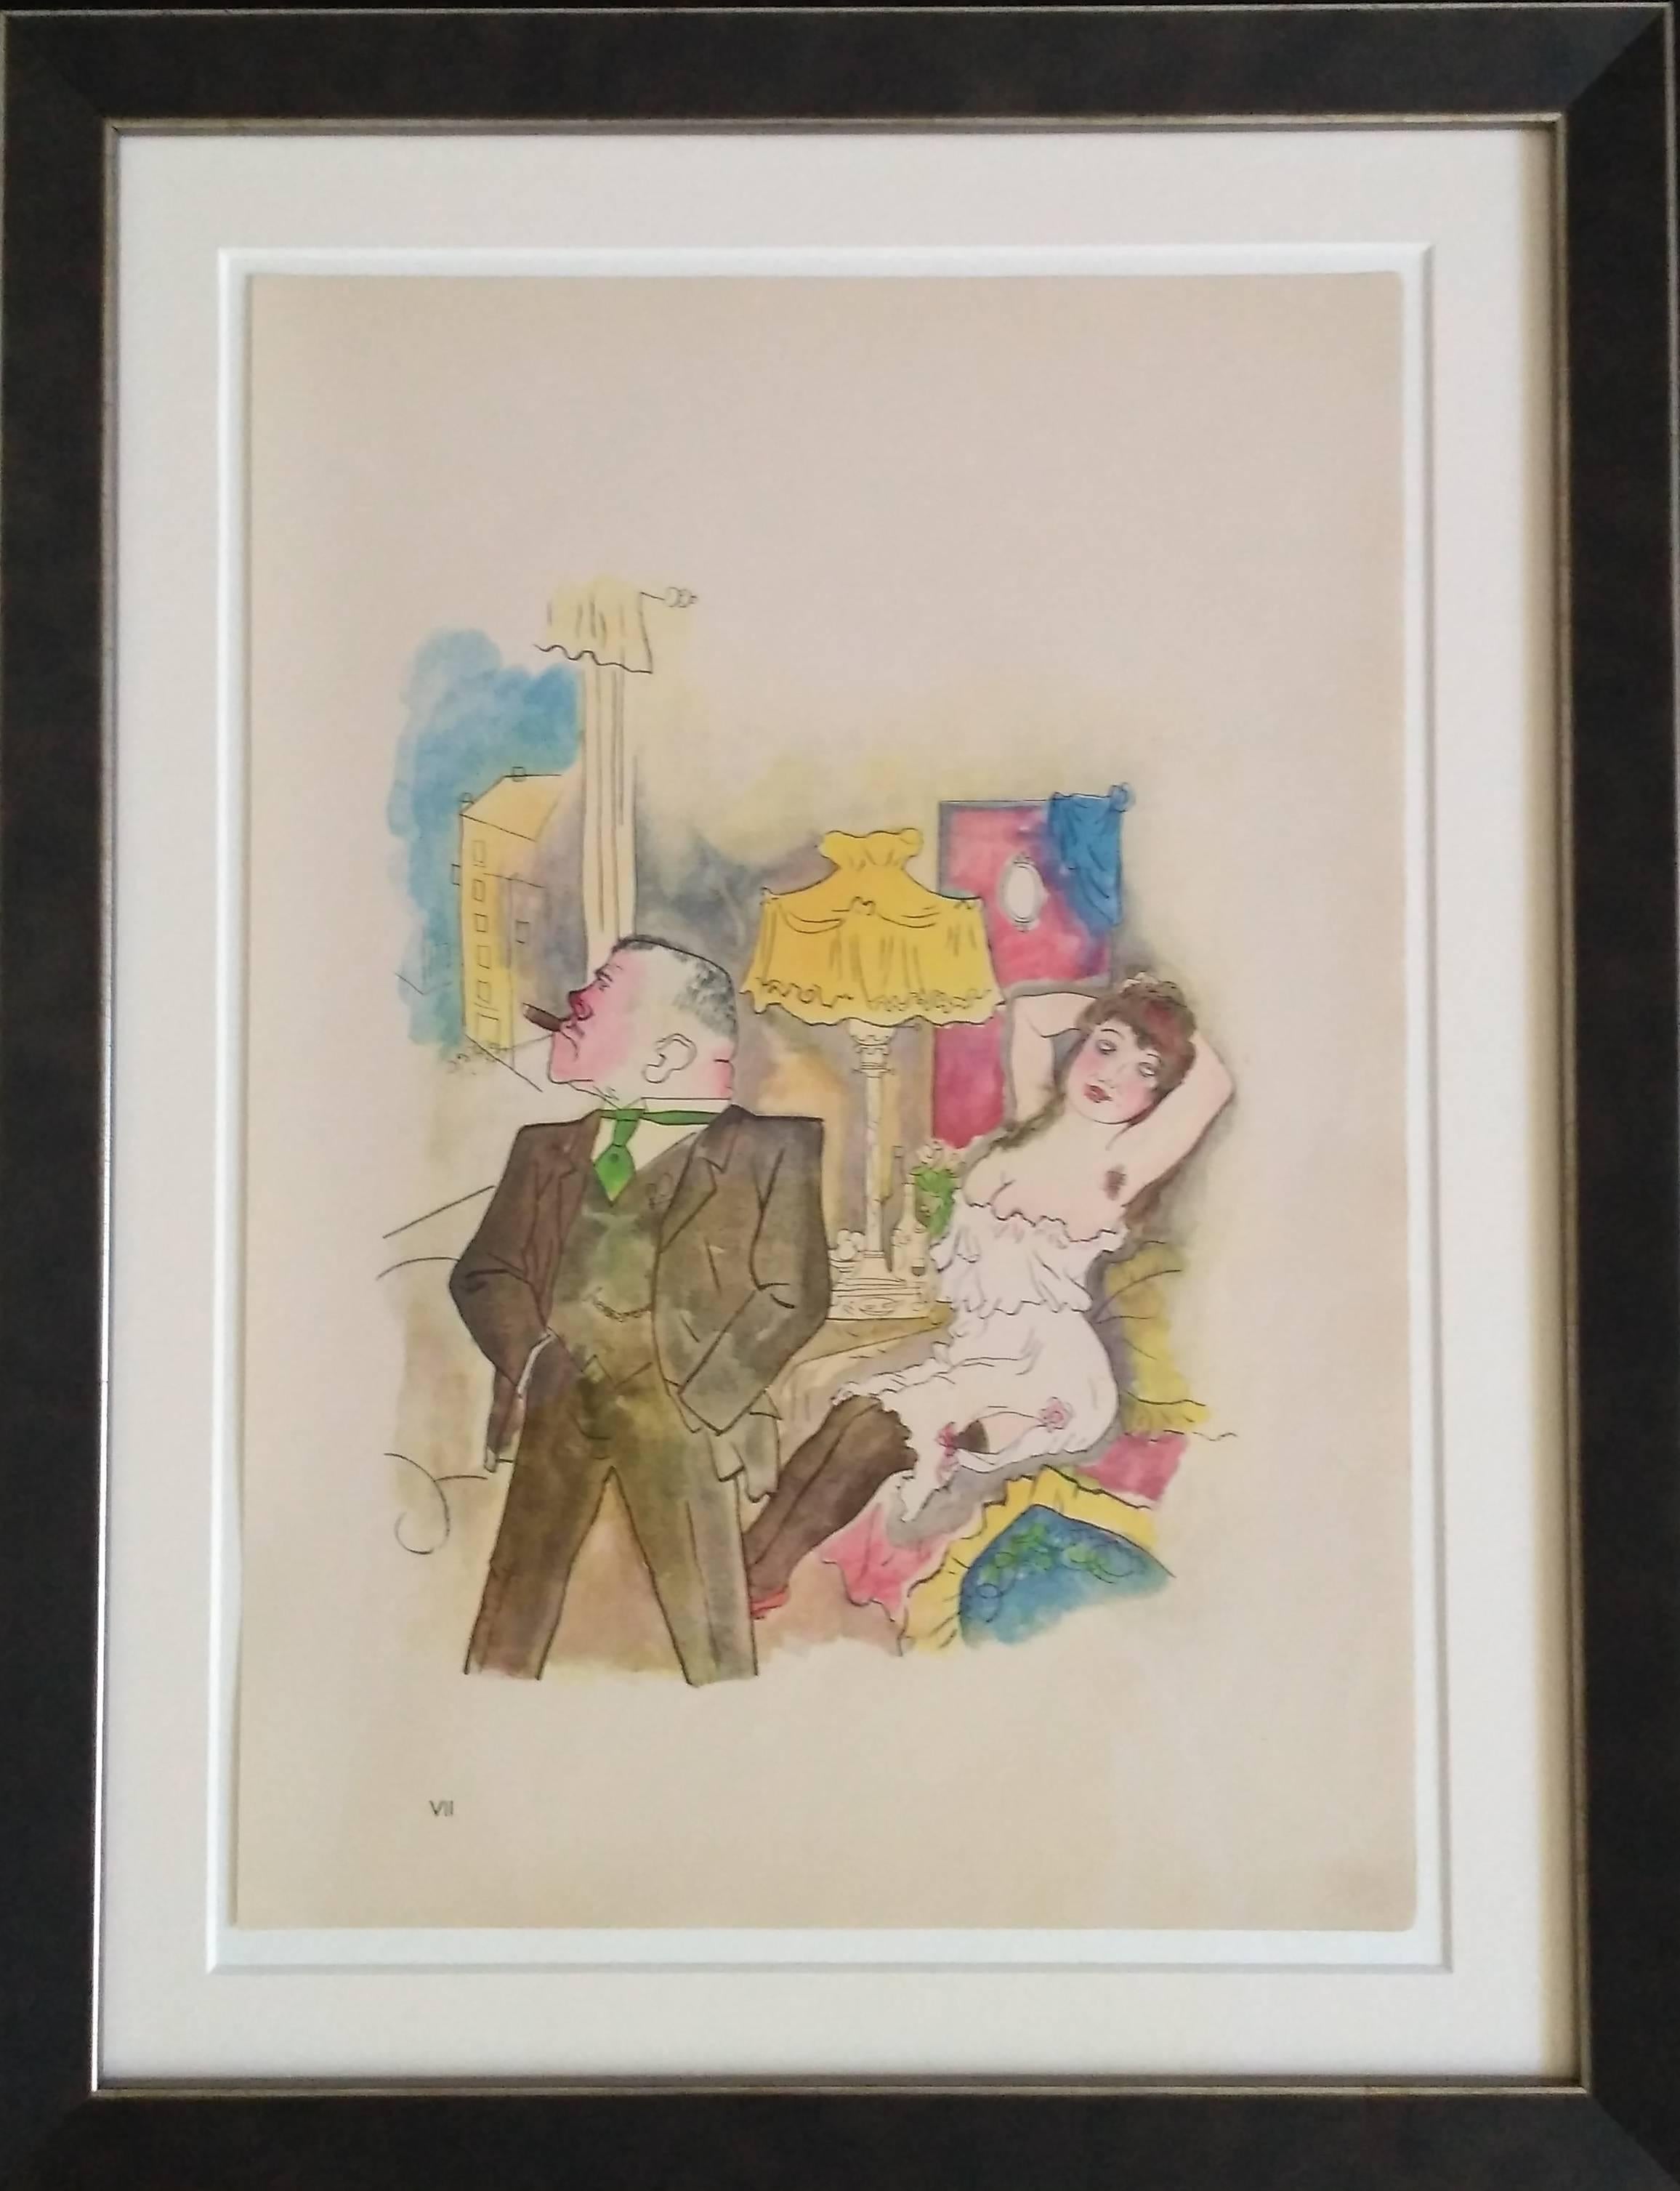 (after) George Grosz Figurative Print – George Grosz Lithographie „Kraft und Anmut“ ( Strength and Grace ), 1922